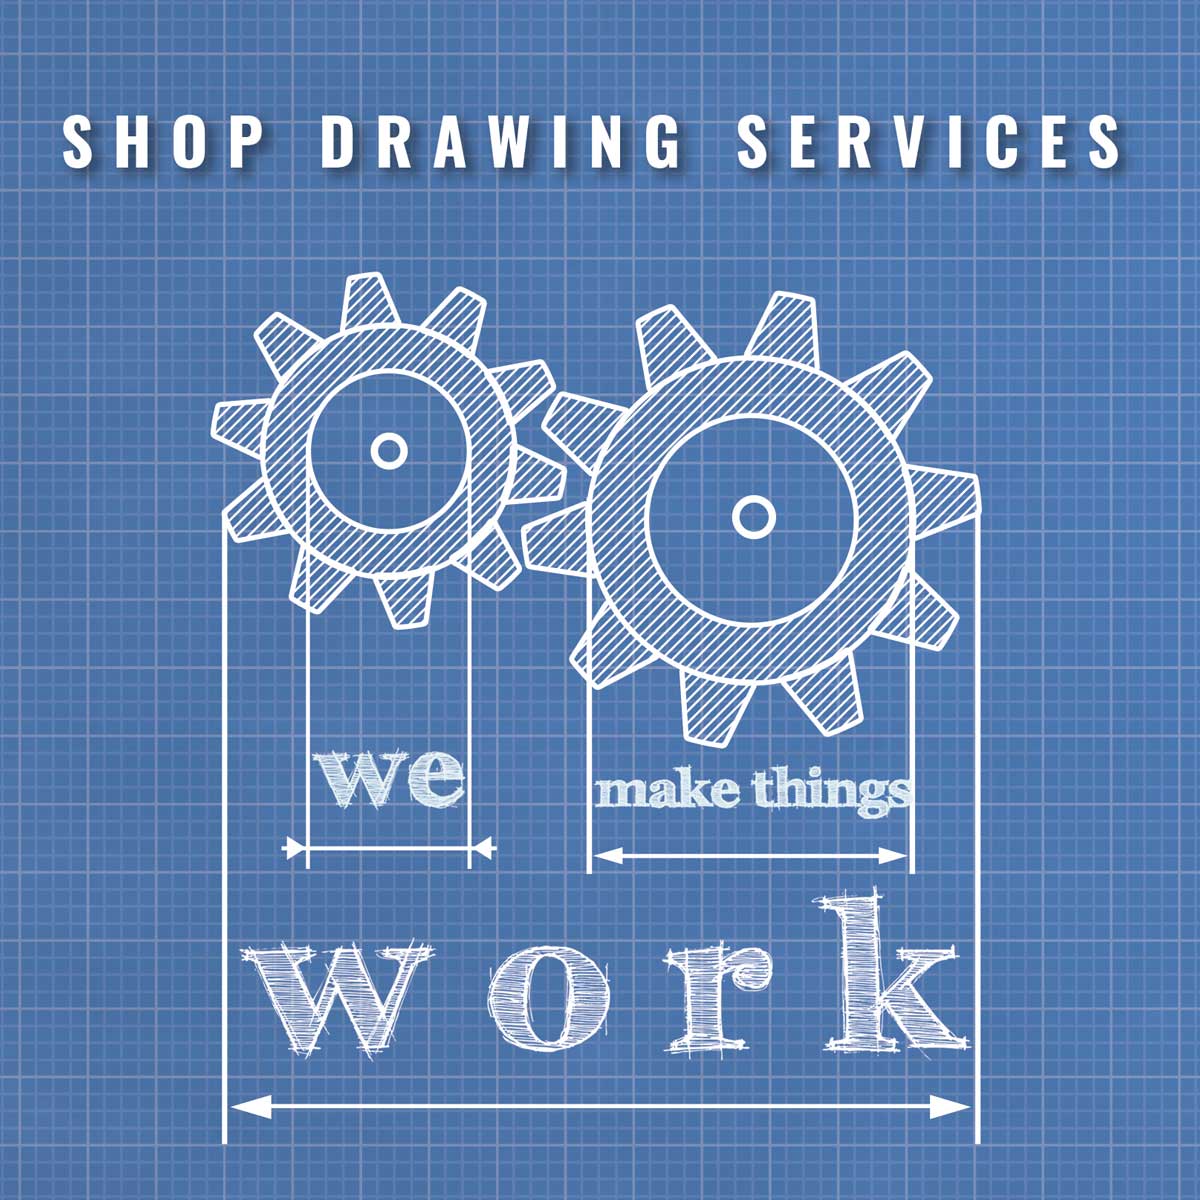 Shop Drawing Services Ltd On Time Shop Drawings